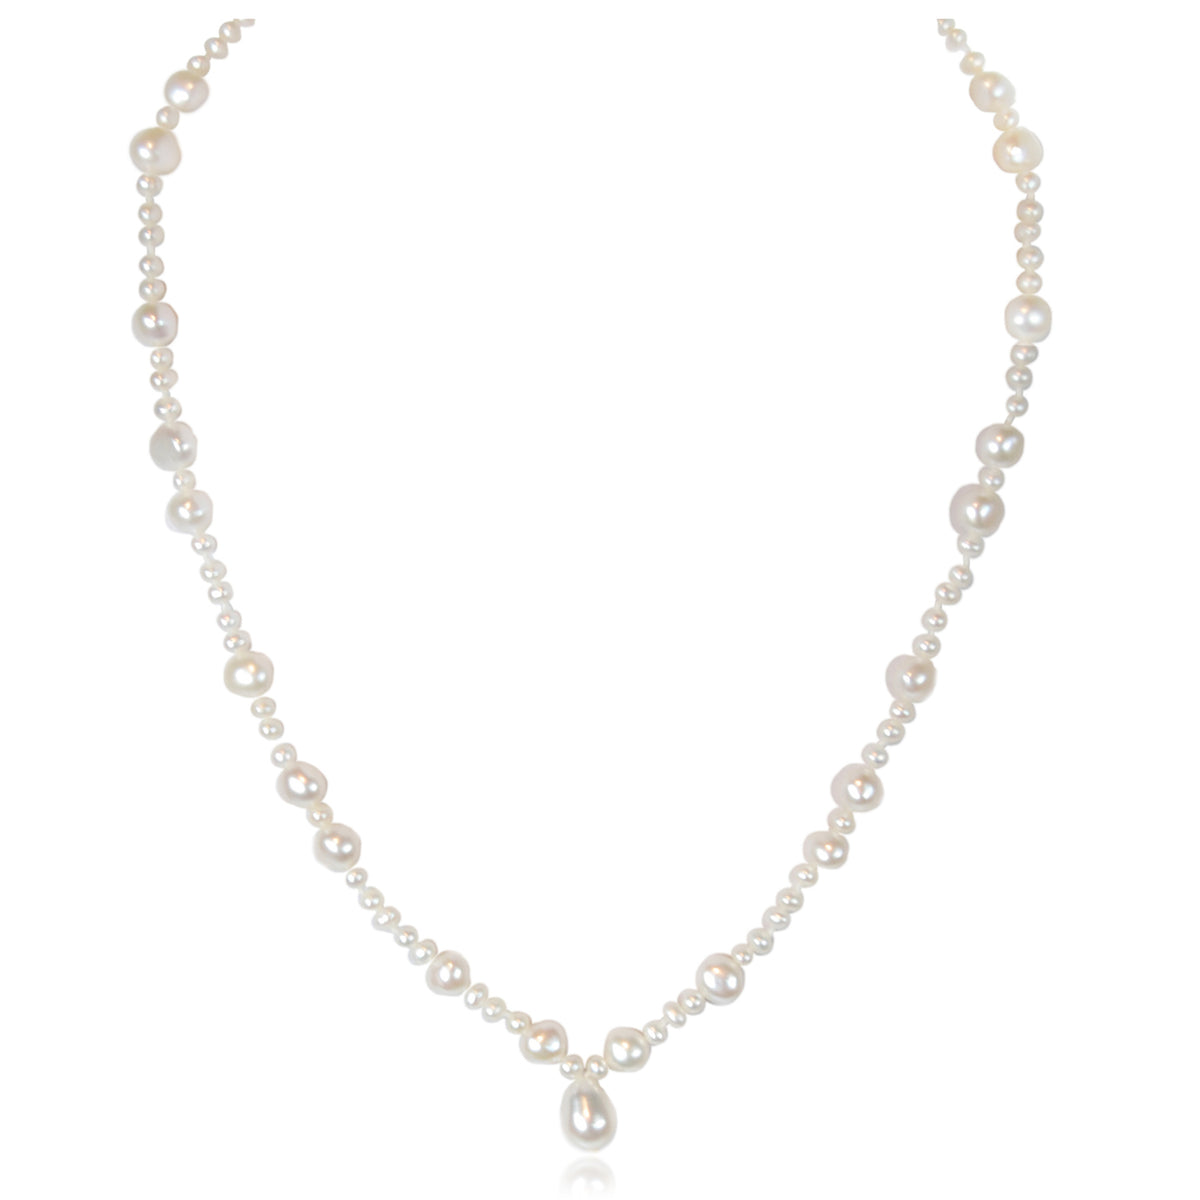 Limited Edition White Freshwater Pearl Single Strand Necklace